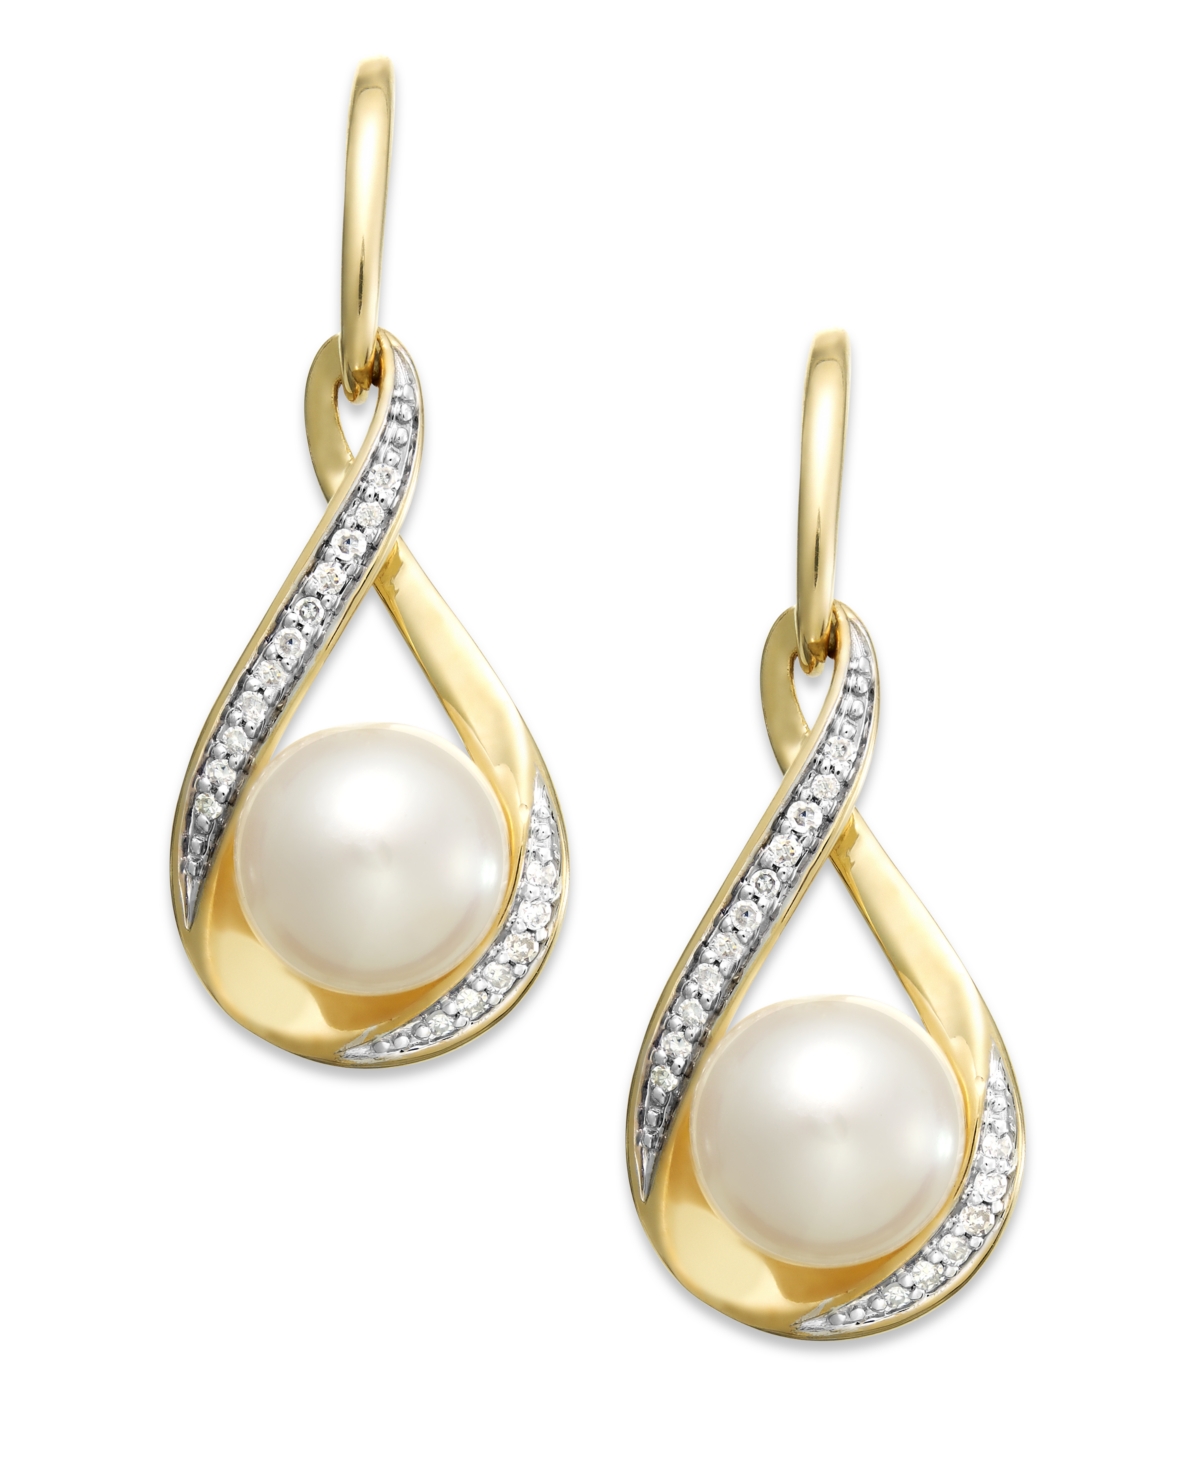 Cultured Freshwater Pearl (7mm) and Diamond (1/10 ct. t.w.) Drop Earrings in 14K Gold - Yellow Gold